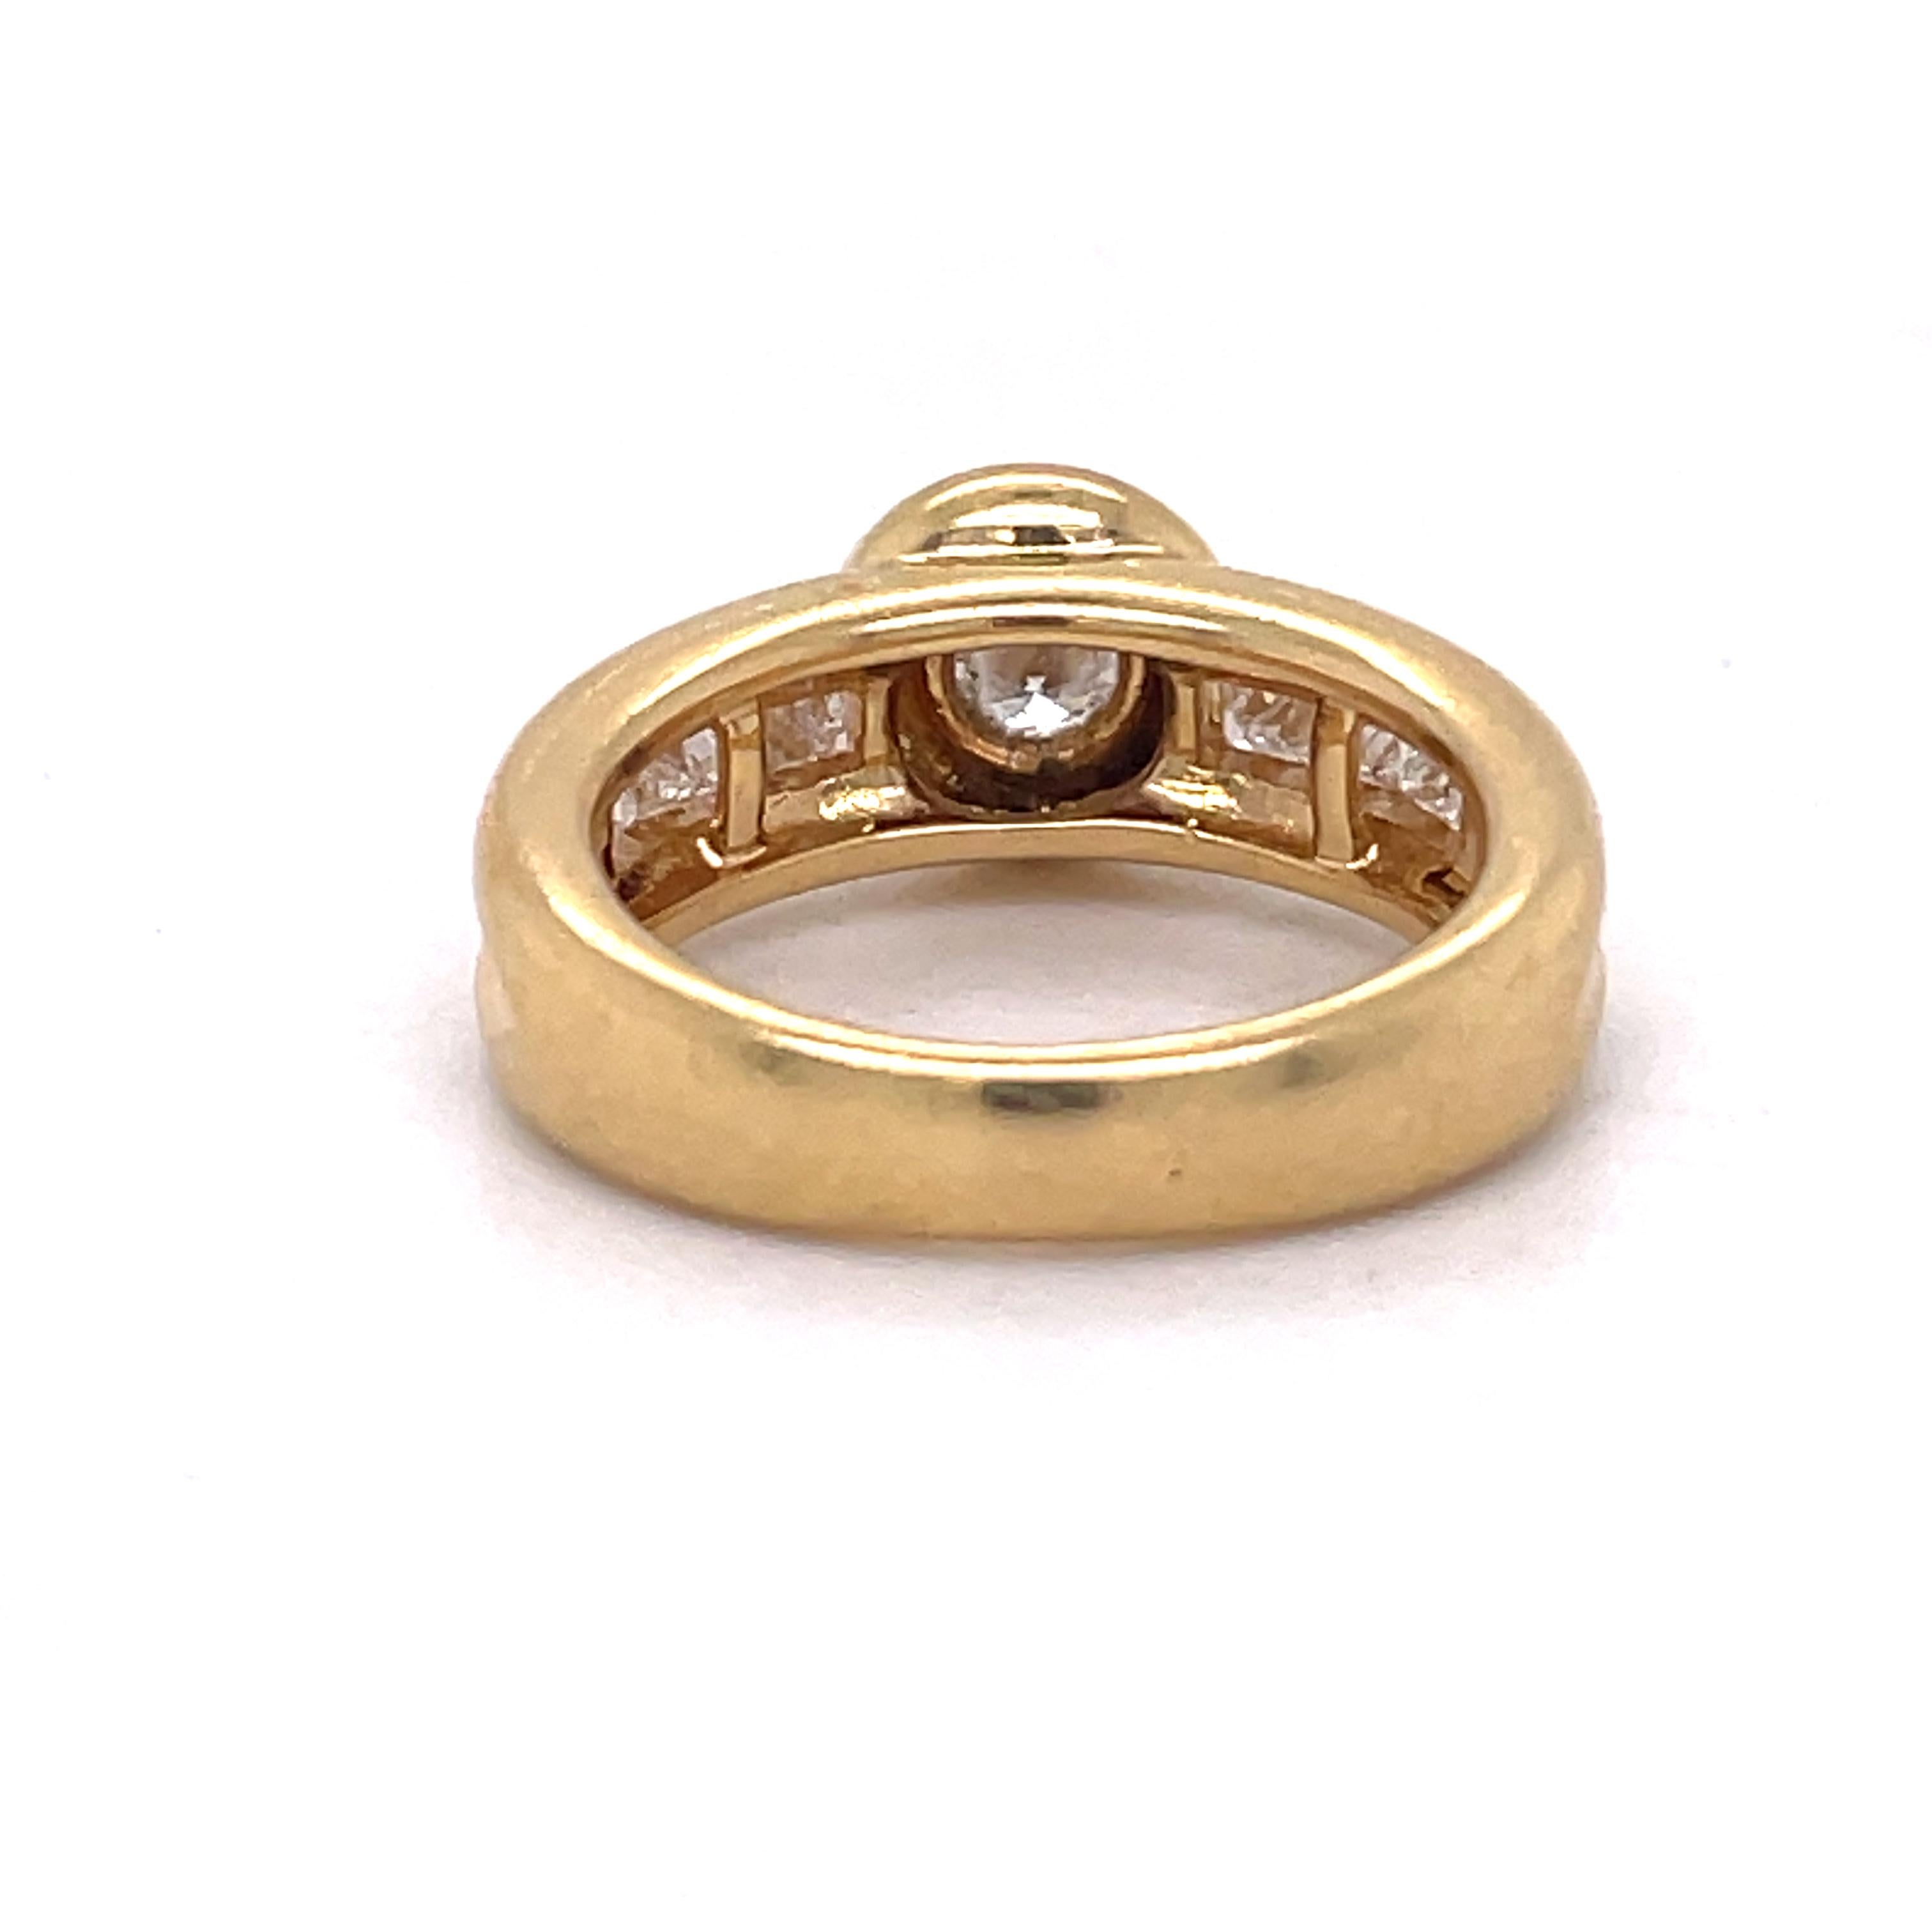 Vintage Bezel Ring, 0.7ct Diamonds round and princess cut, 18K Yellow gold ring In Excellent Condition For Sale In Ramat Gan, IL